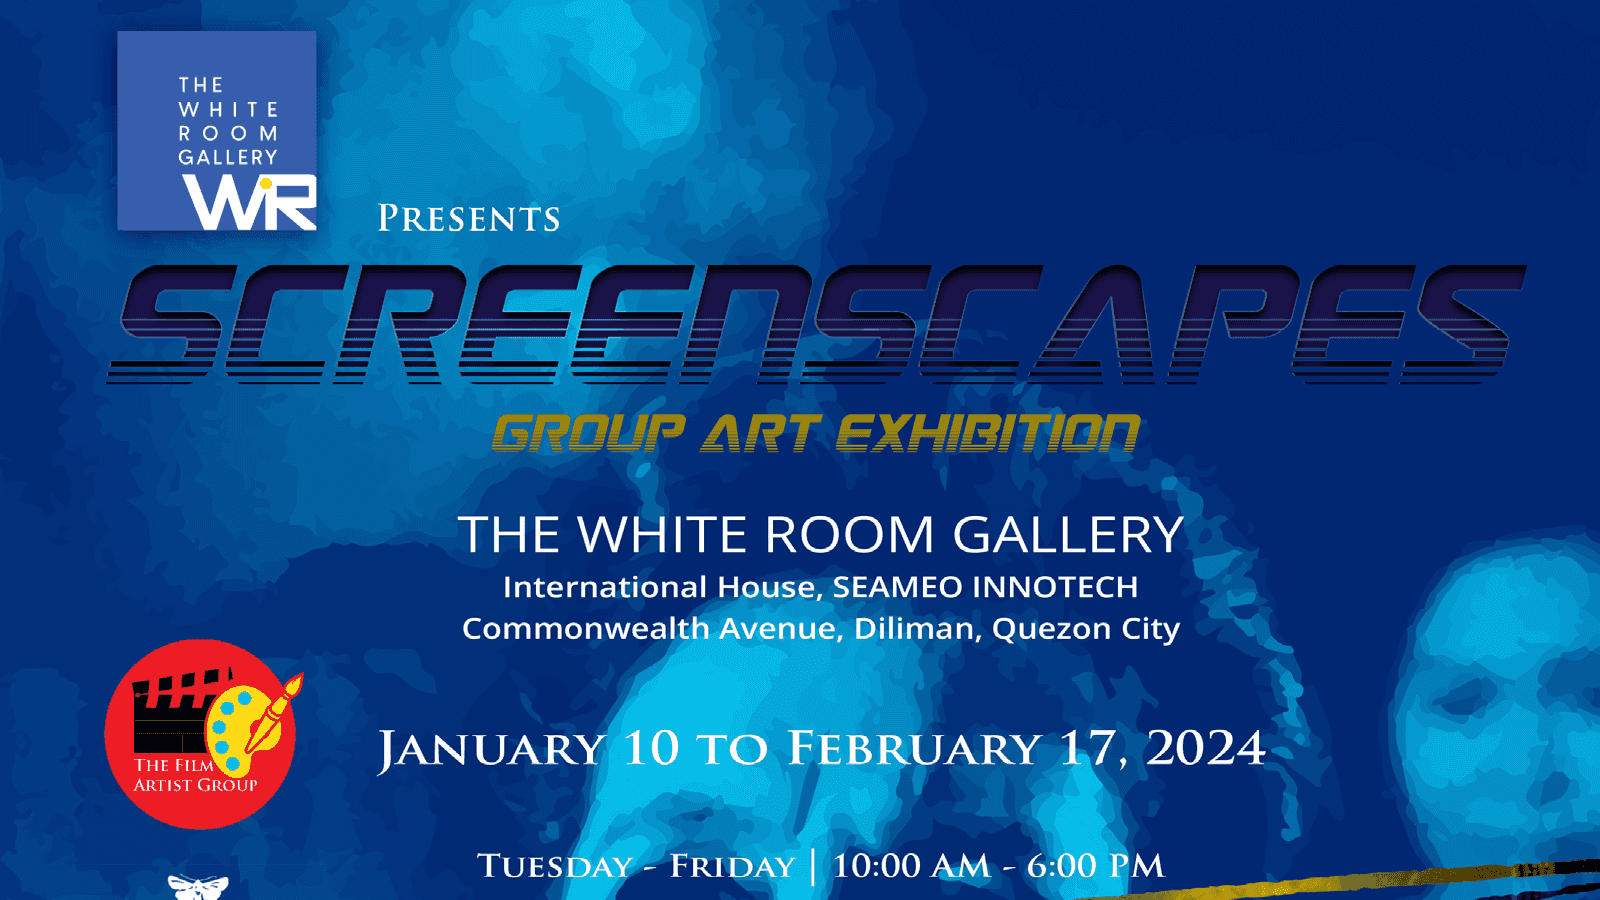 The White Room Gallery welcomes entertainment veterans to ‘Screenscapes